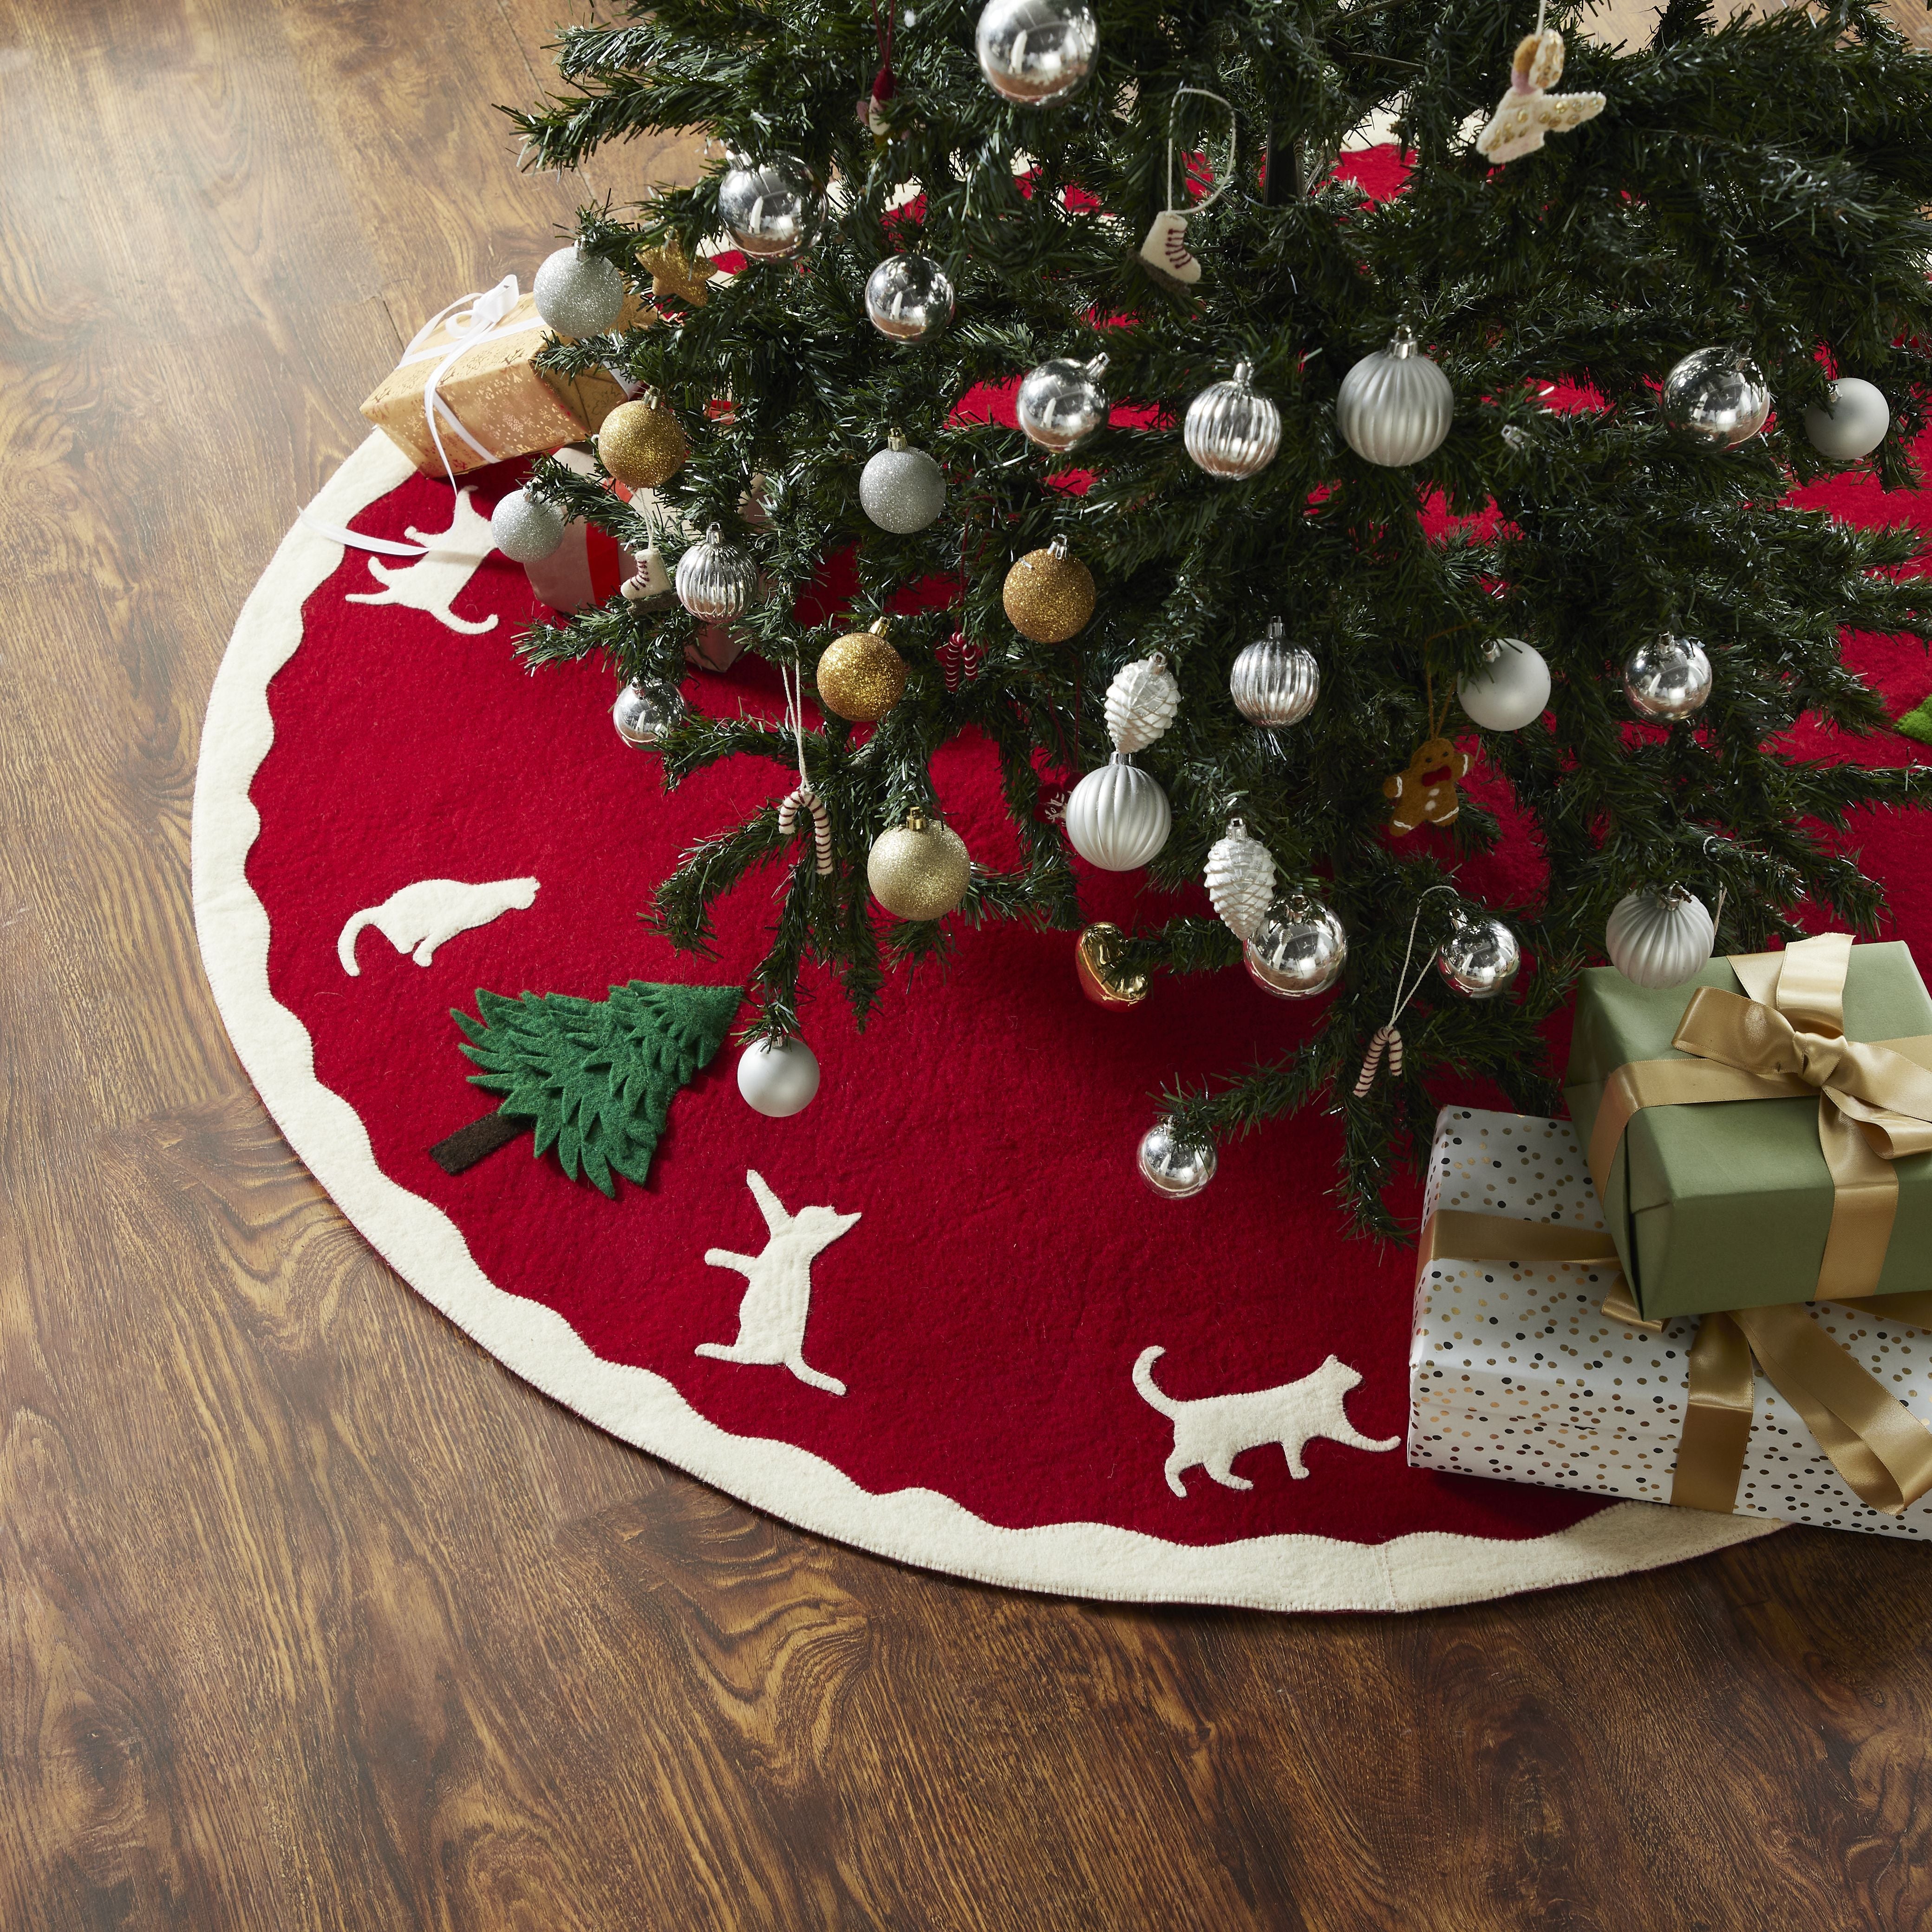 Cats & Green Trees Hand-felted Christmas Tree Skirt - 60"